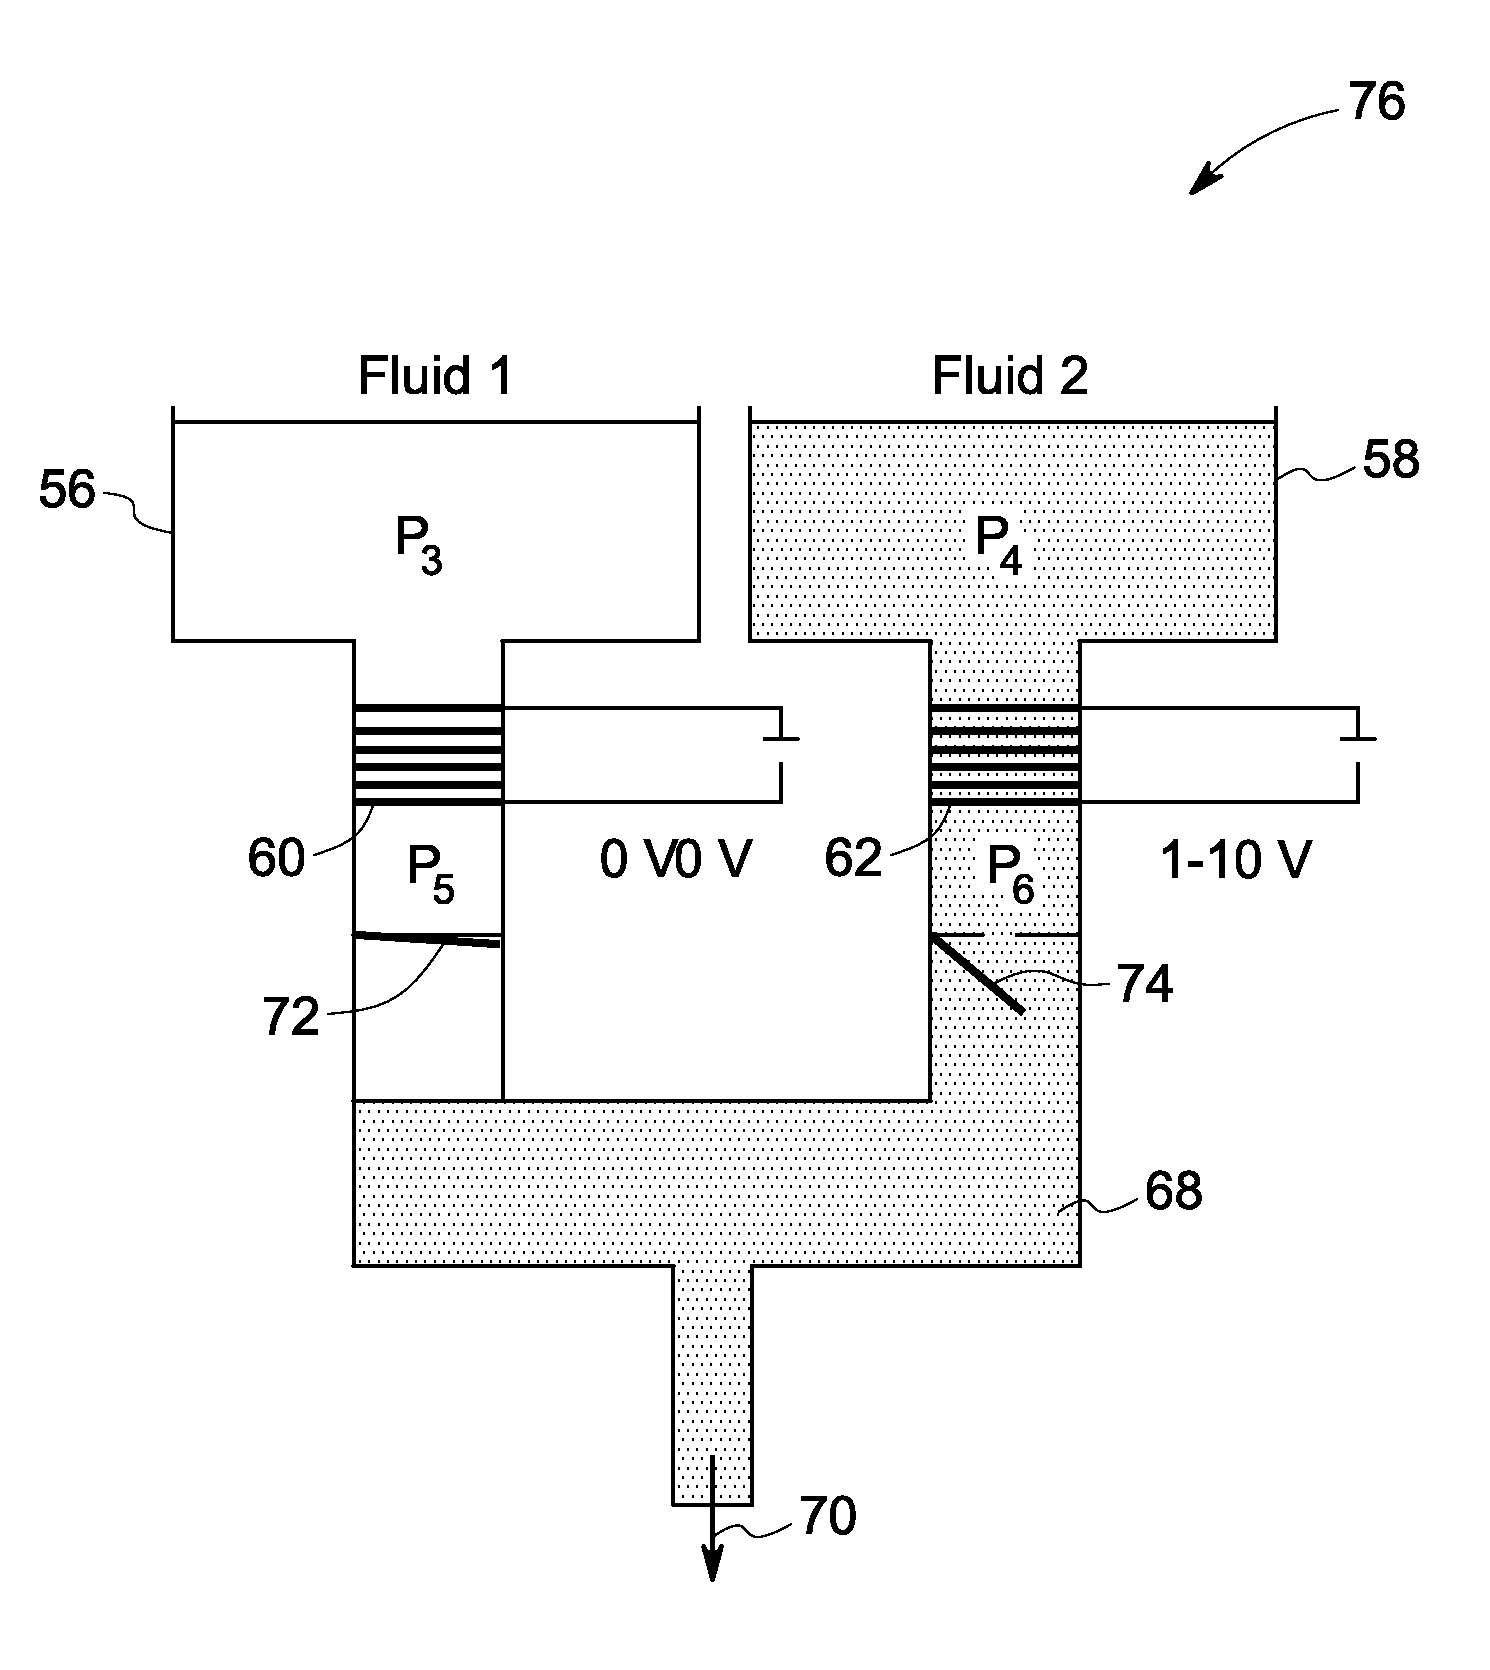 Actuation of valves using electroosmotic pump